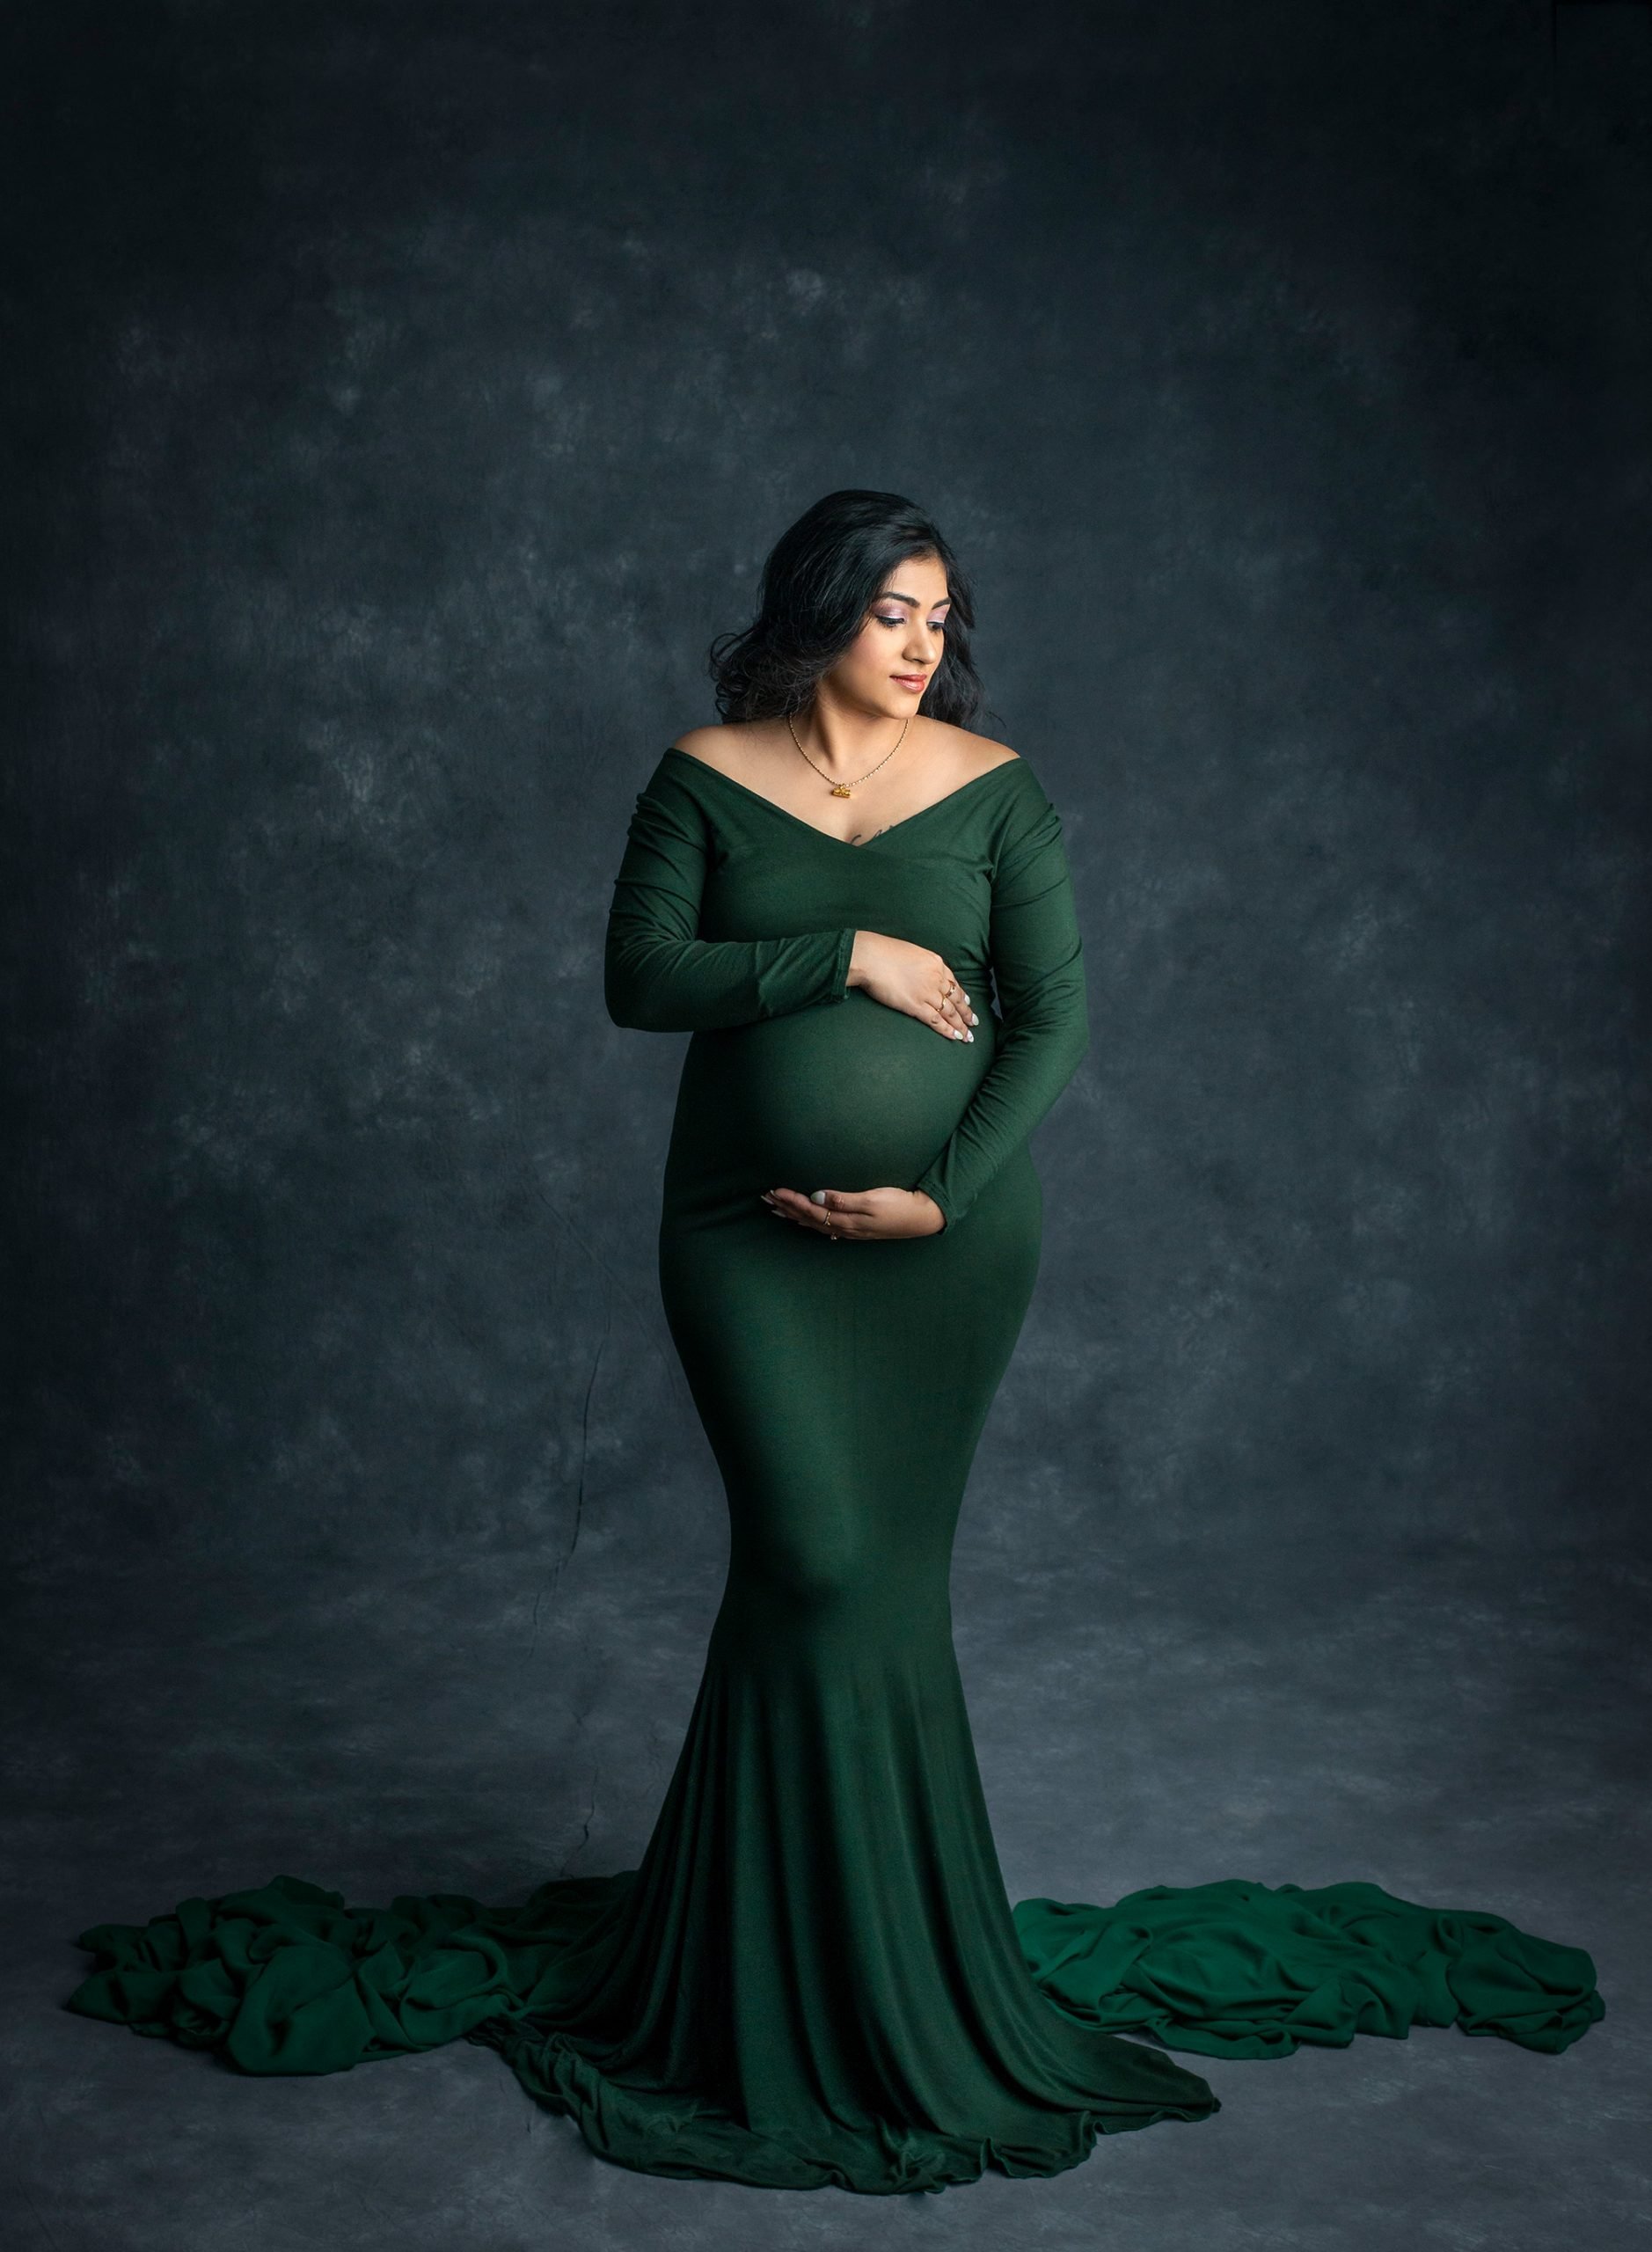 Indian Goddess Maternity photographs pregnant woman posing in green maternity dress with her hands on her pregnant belly